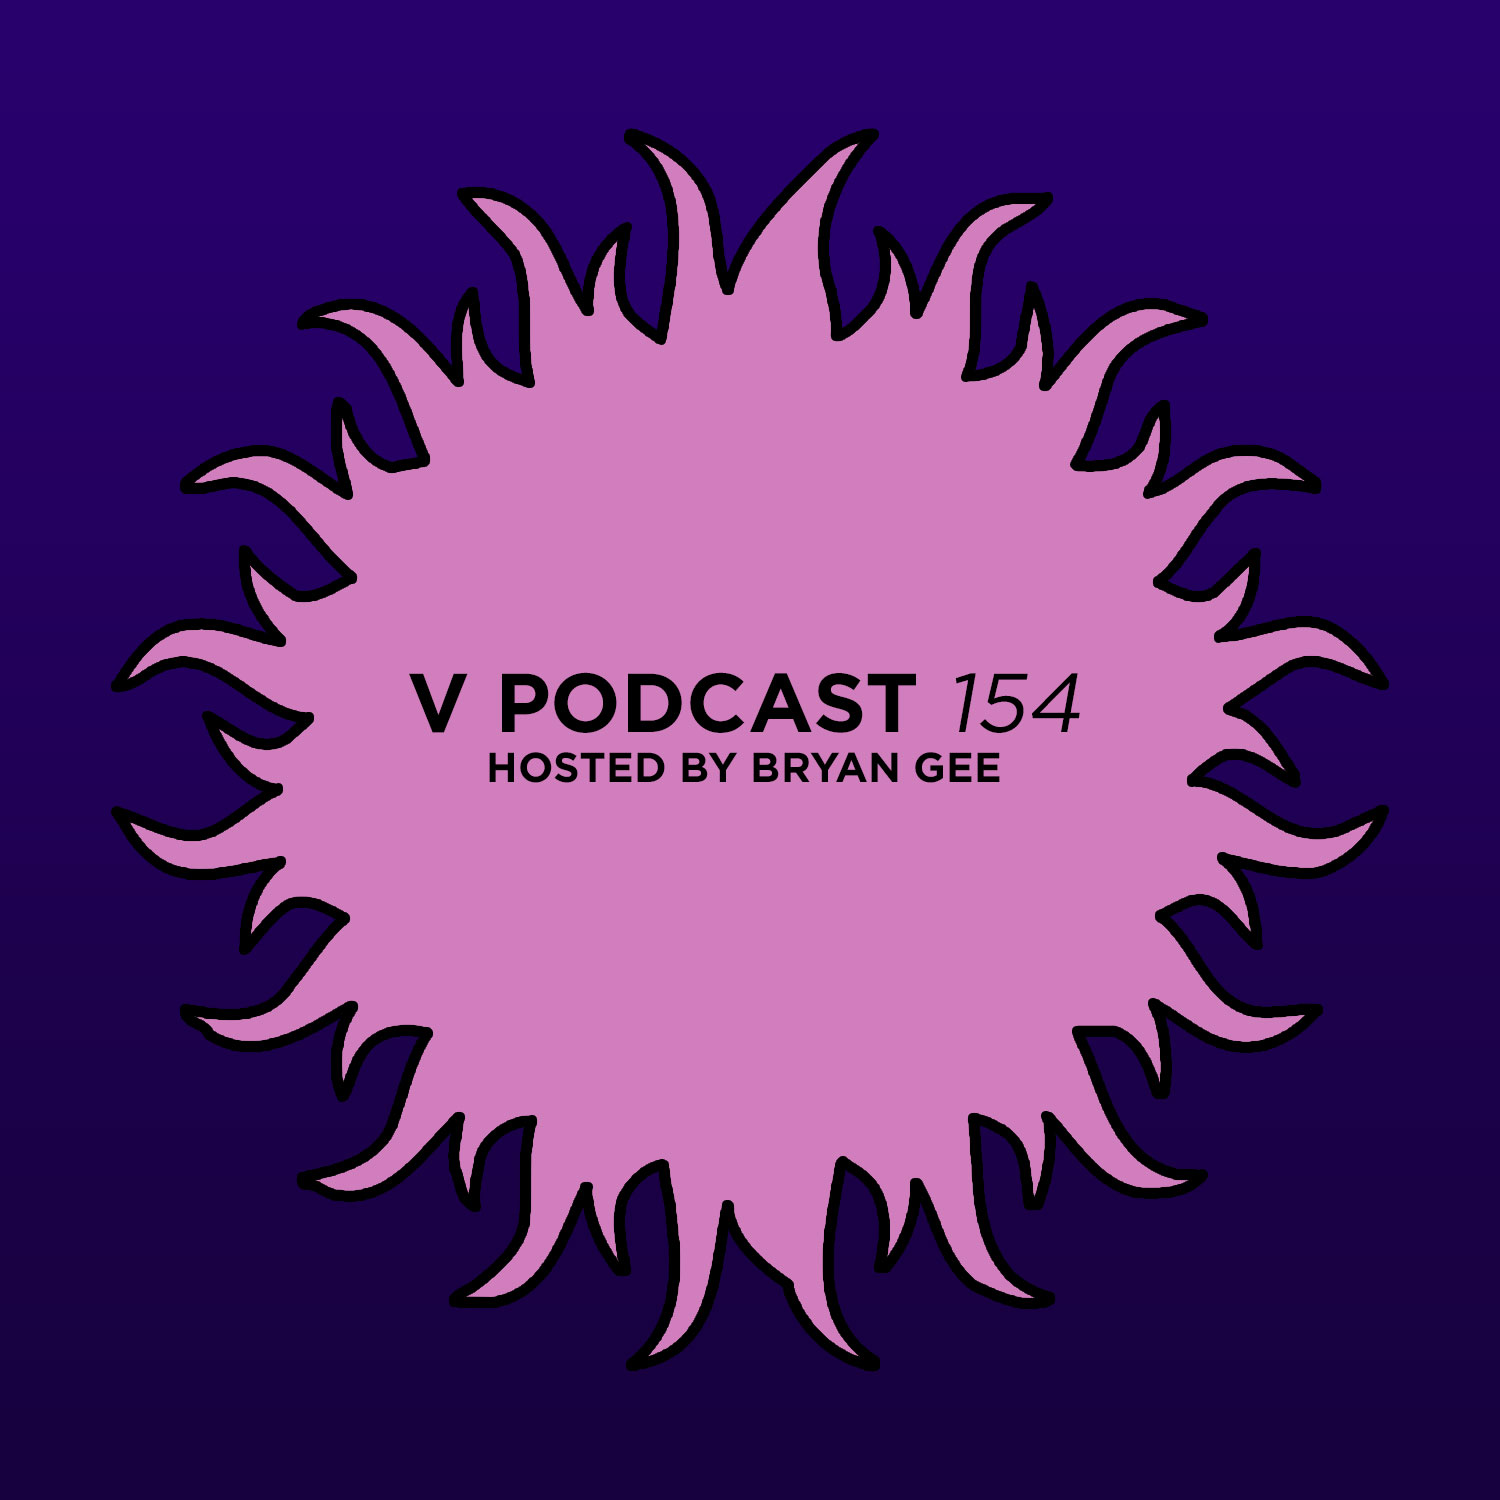 V Podcast 154 - Hosted by Bryan Gee w. Sl8r Guest Mix